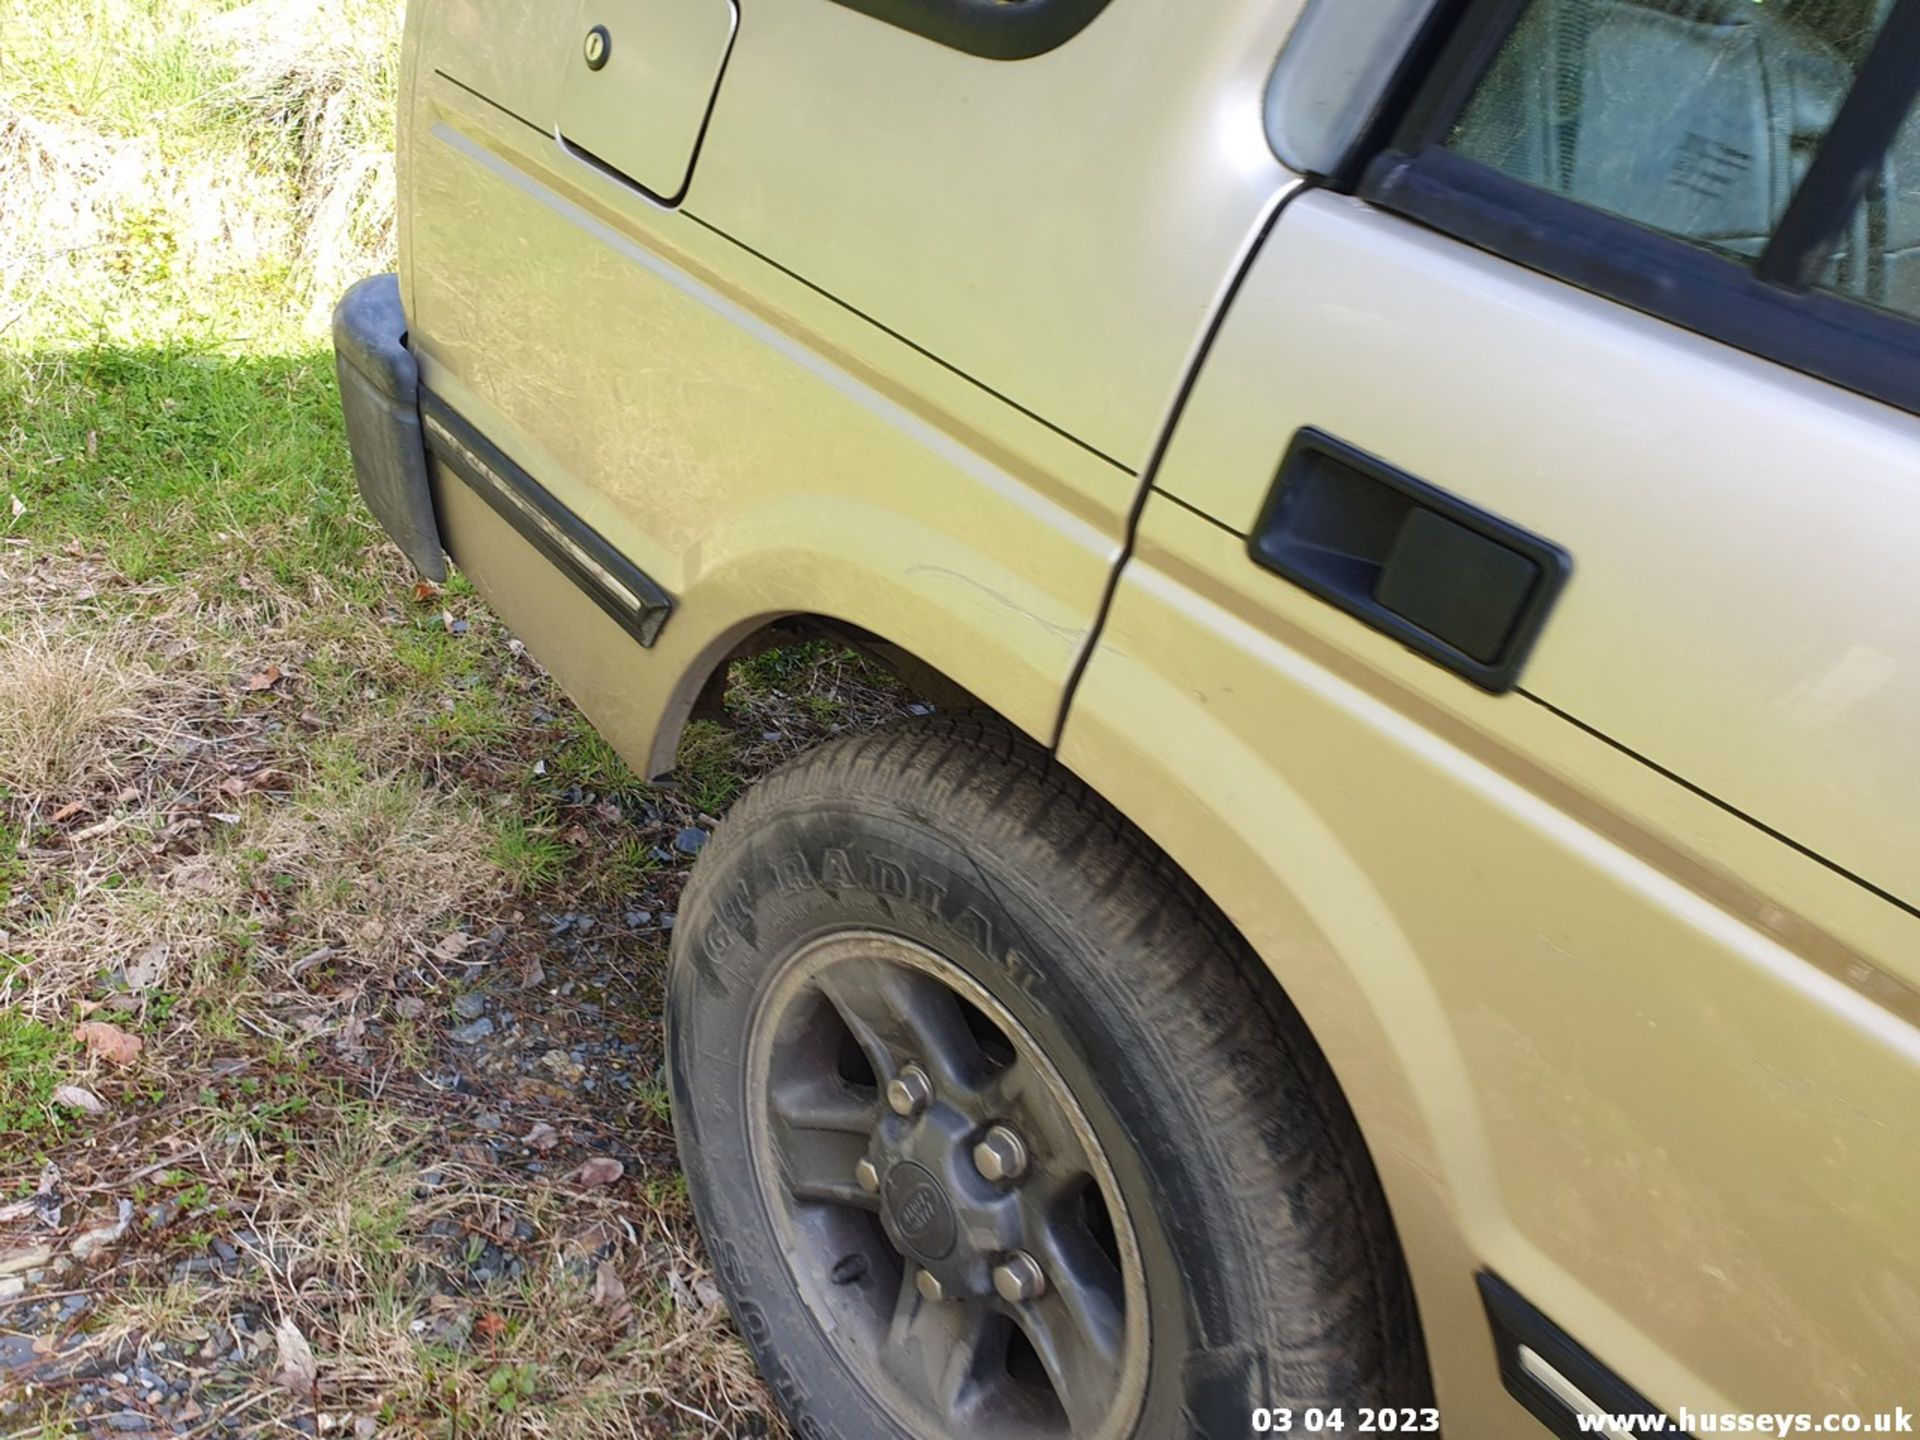 1998 LAND ROVER DISCOVERY ES TDI - 2495cc 5dr Estate (Gold) - Image 11 of 31